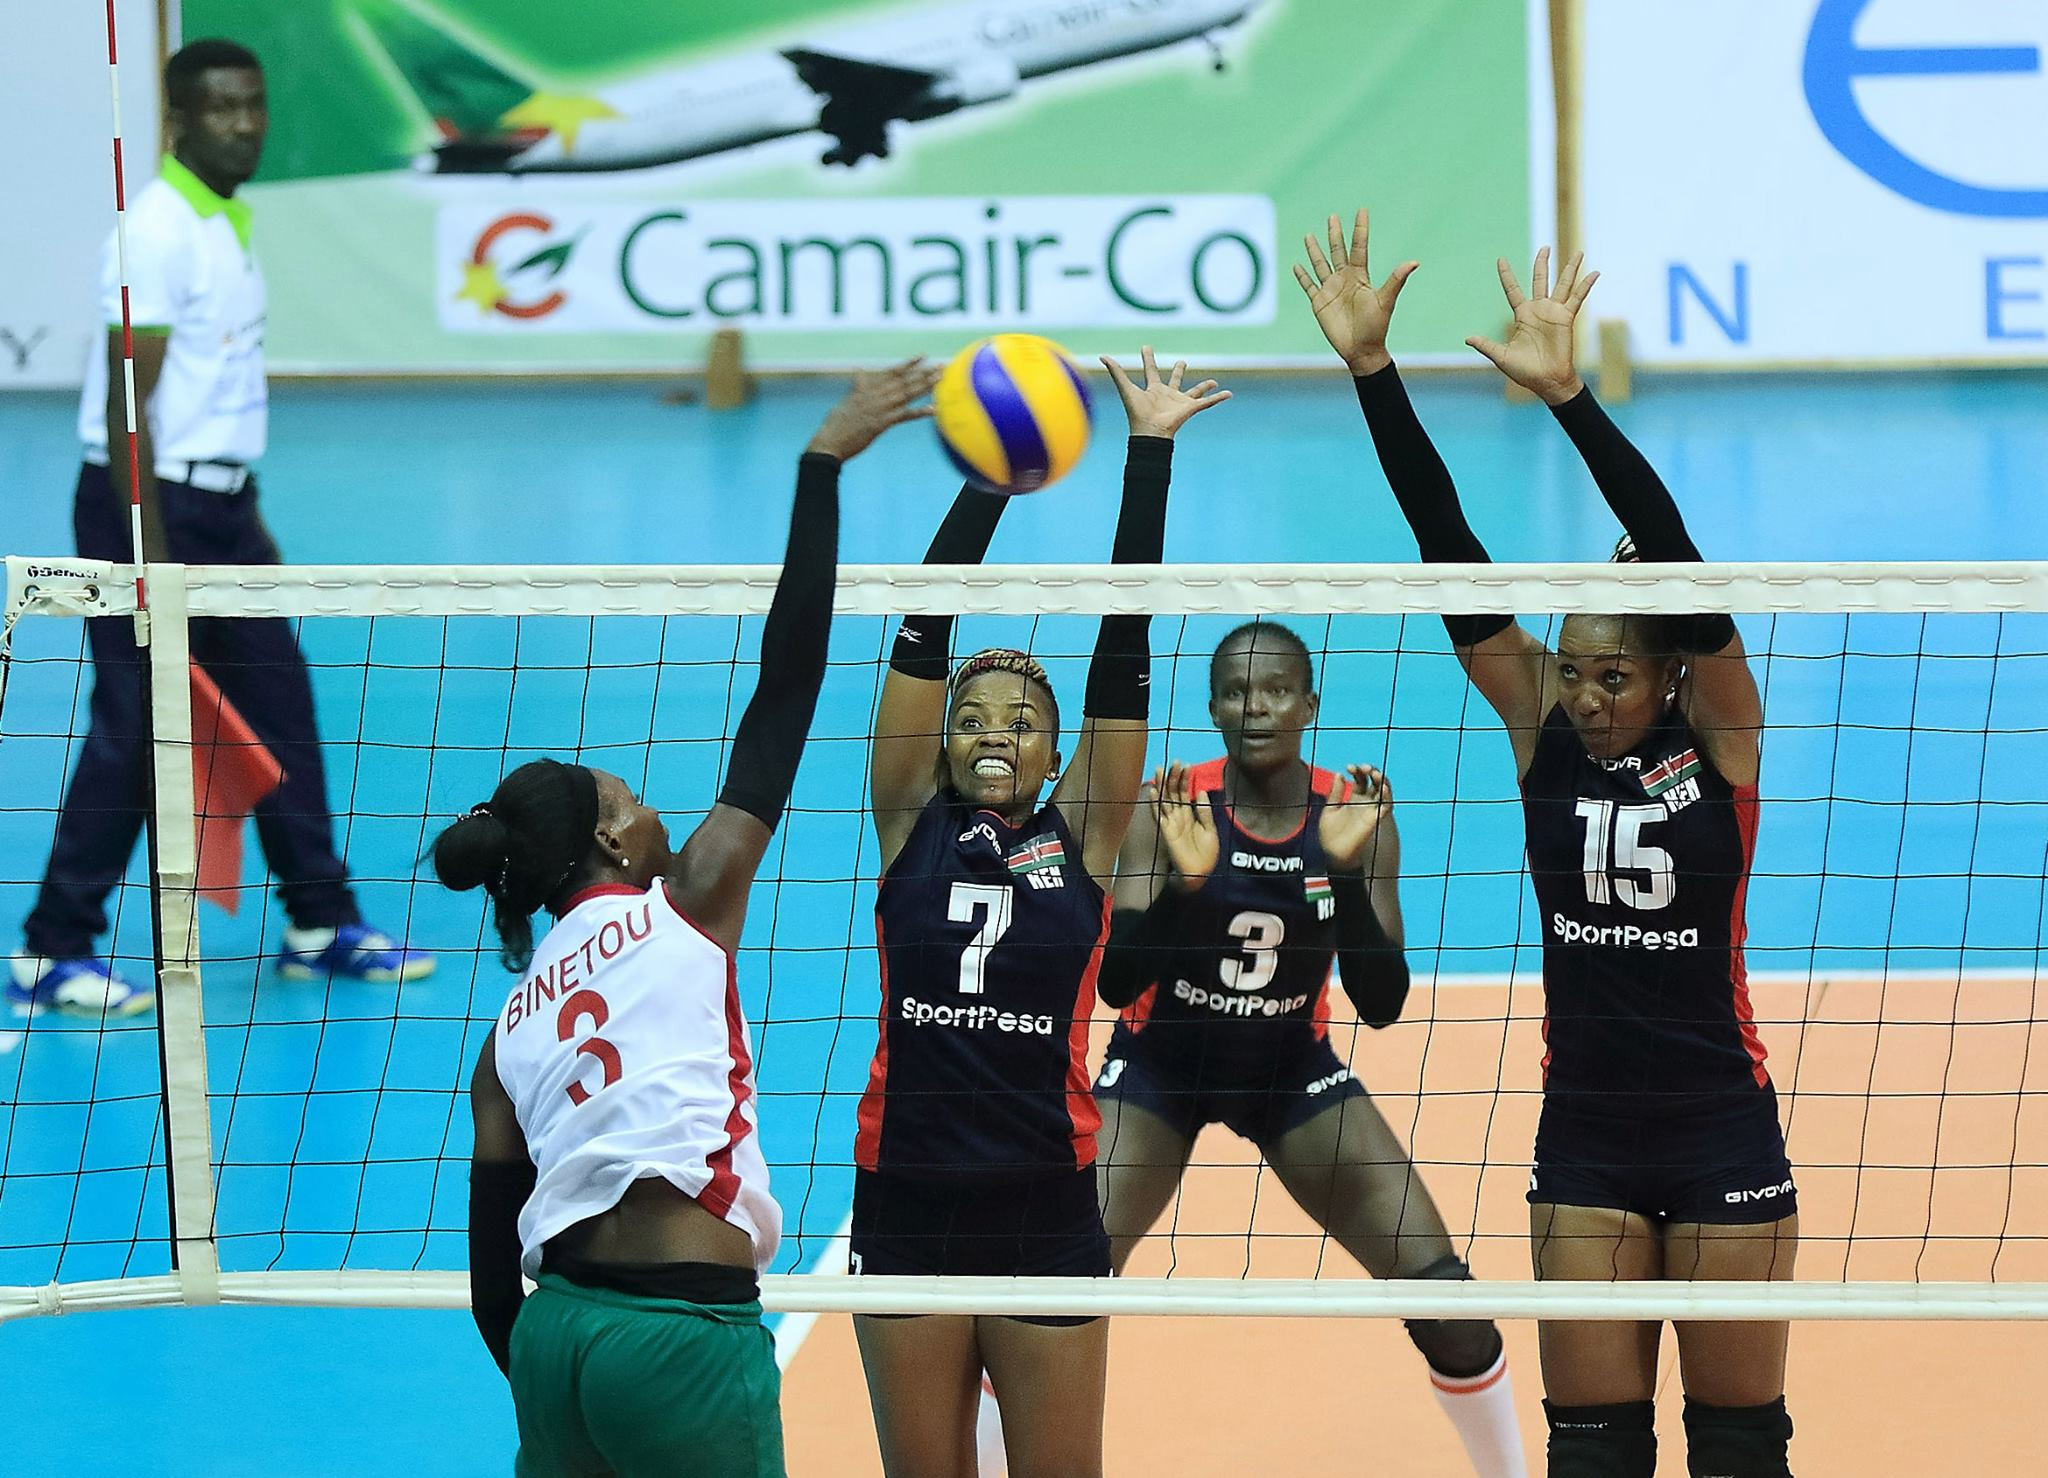 Holders record second consecutive straight sets win at African Women's Volleyball Championship